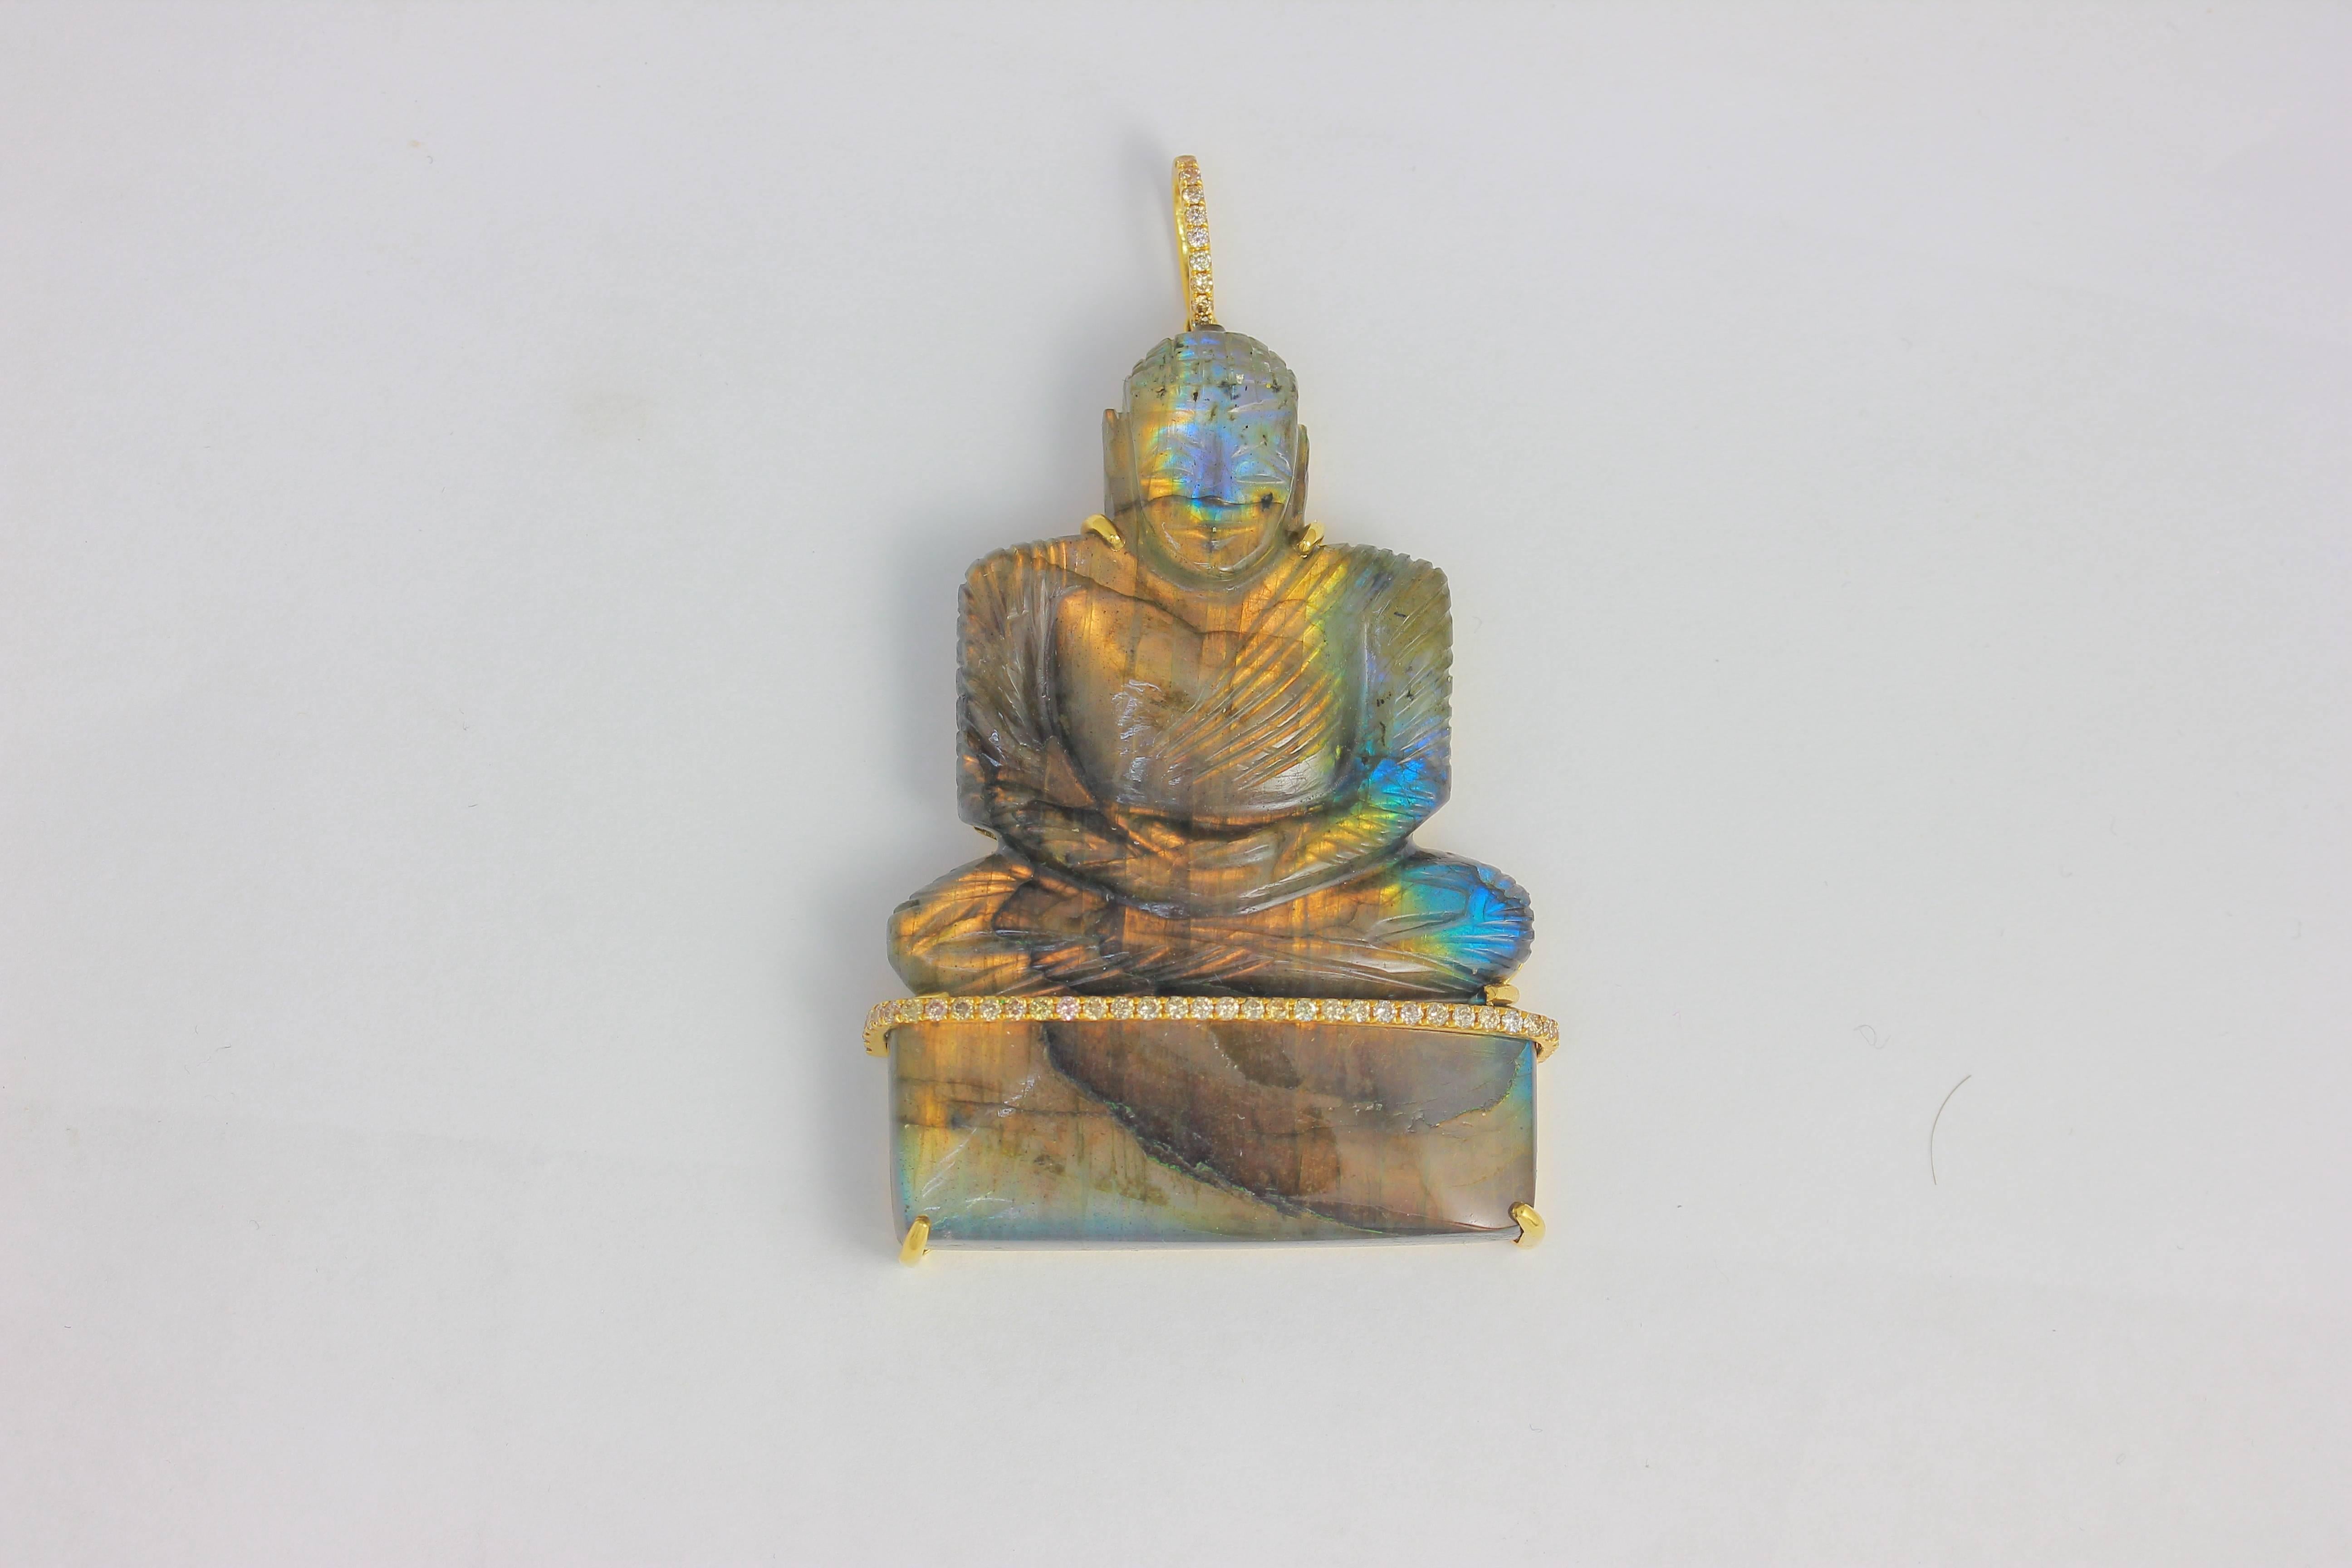 18K YG OAK LABRADORITE CARVED BUDDHA WITH CHAMPAGNE DIAMONDS PENDANT WITH CHAIN
LABR 132.70 Carats 45 DIA 0.45 Carats